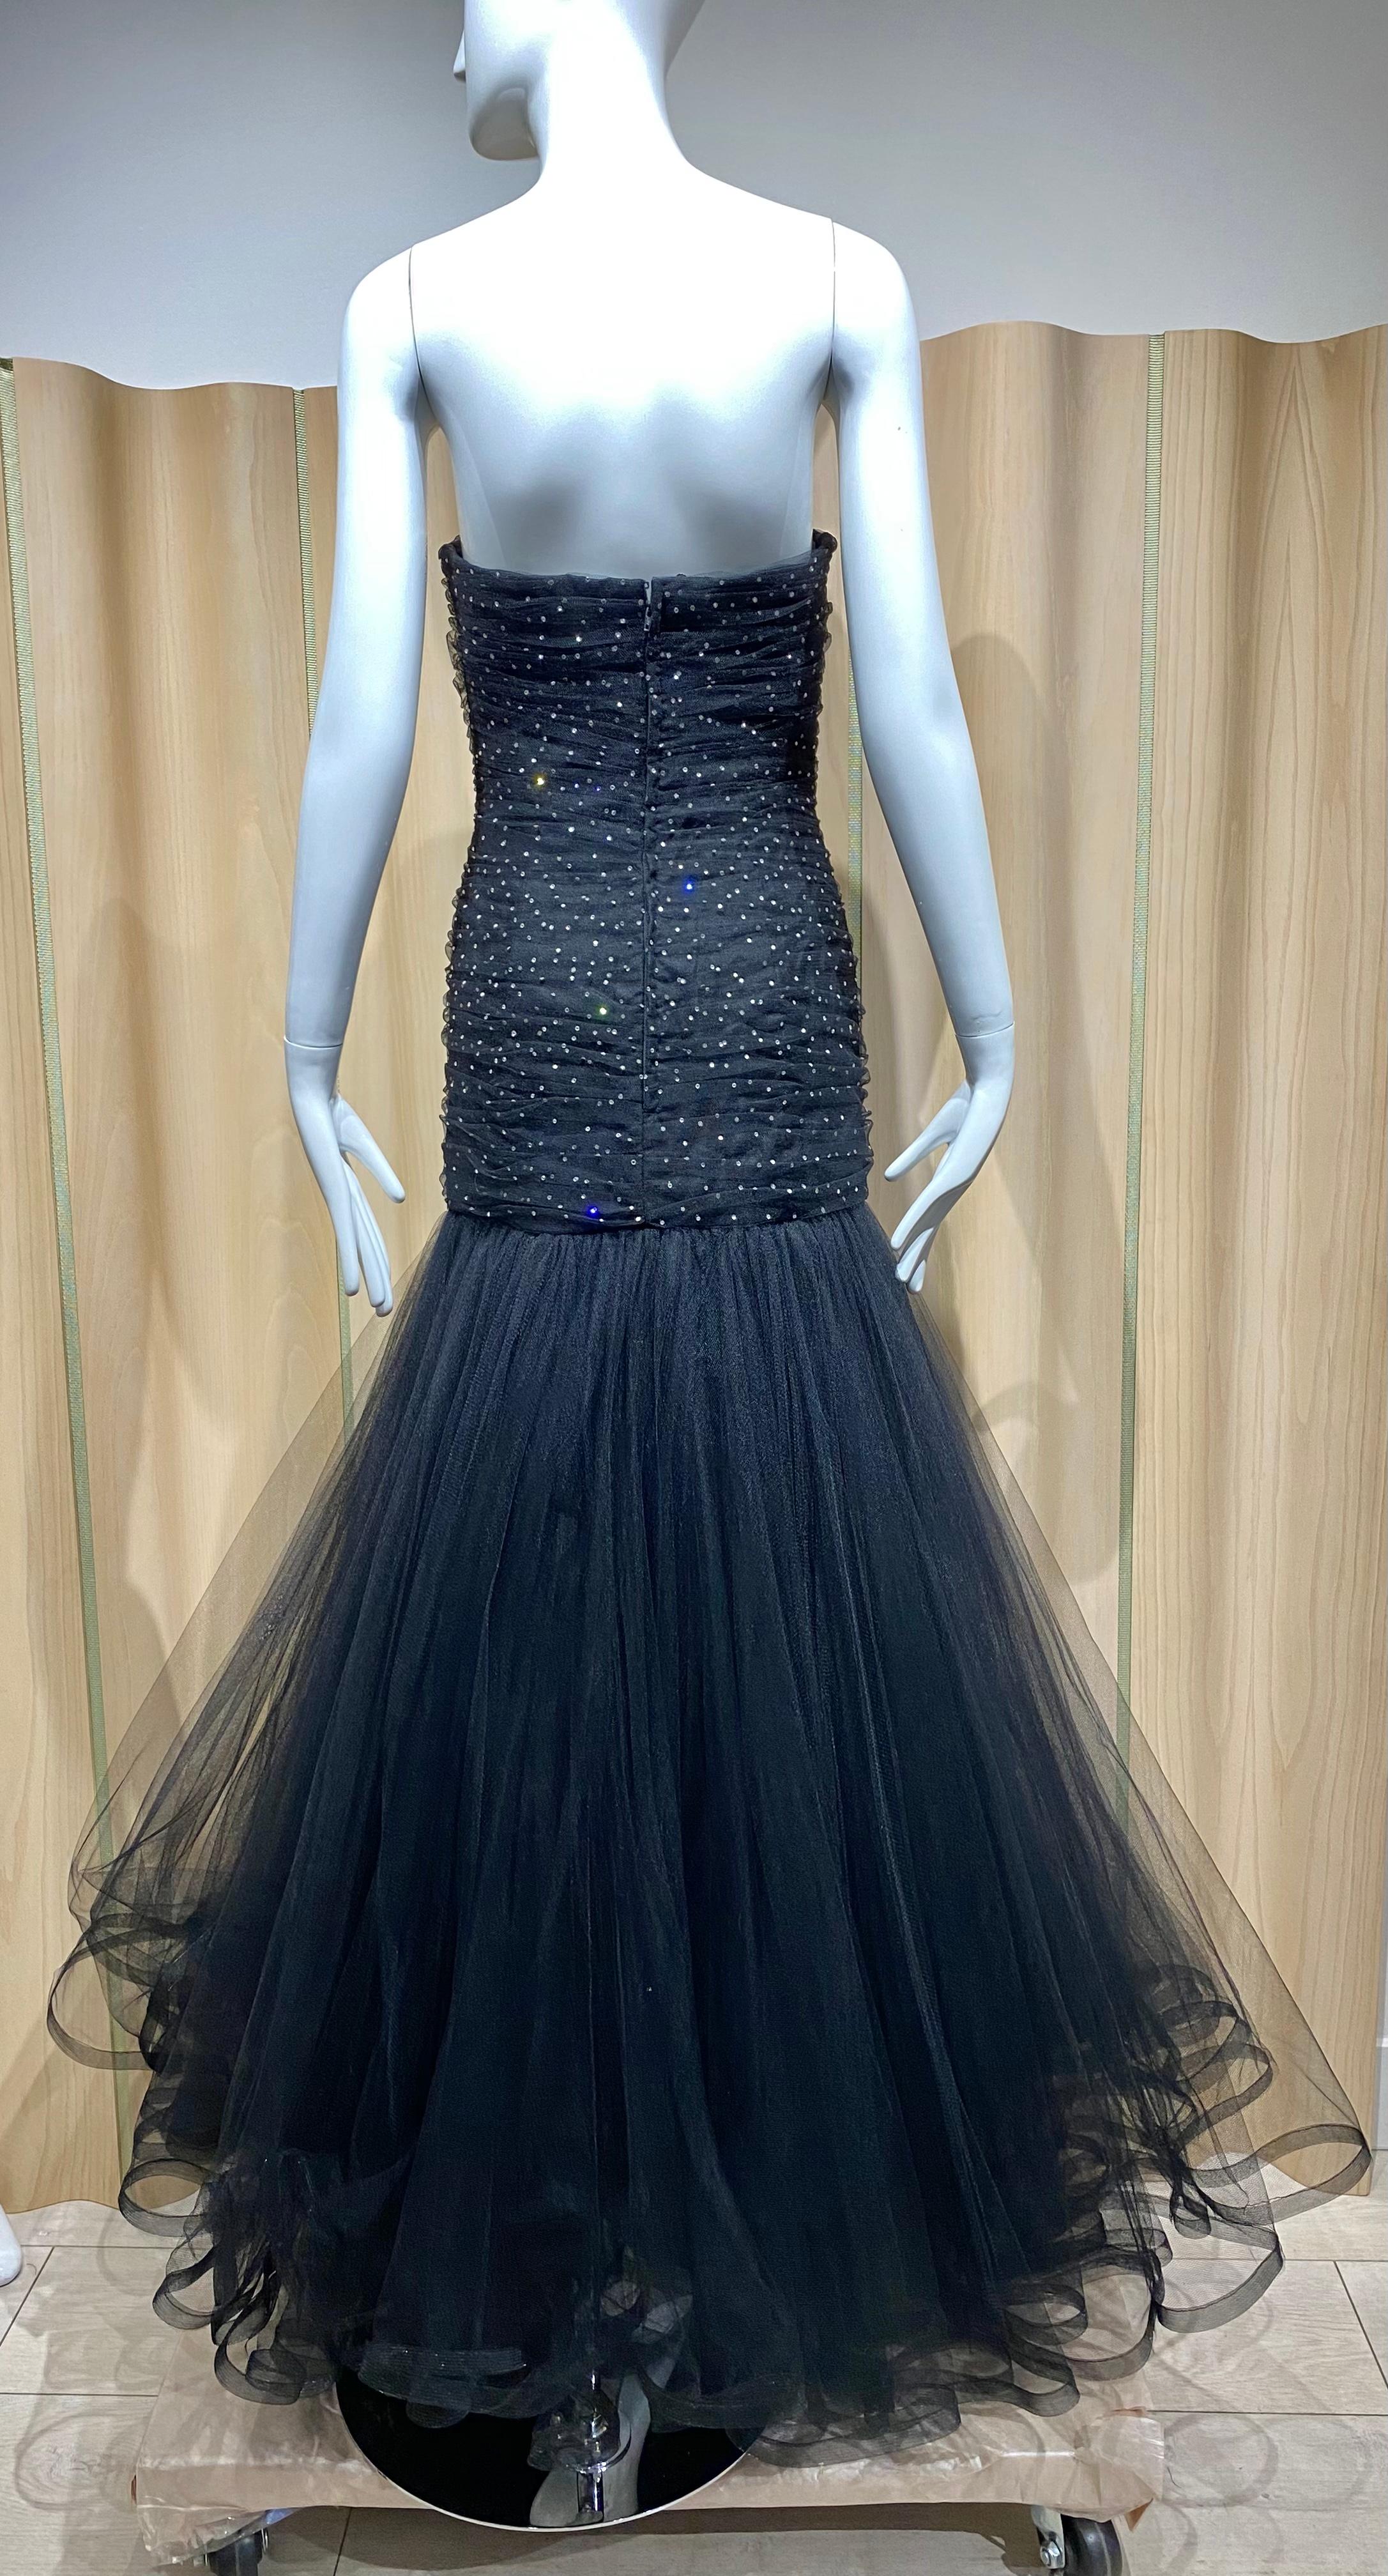 1990s Murray Arbeid from Bergdorf Goodman  strapless tulle gown as worn by Lady Diana ( see image) . Gown has 5 layers of tulle with silver stars sequins. Perfect for Holiday Party or Black tie event.
Size Small 
Measurement :
Bust 34”/ Waist 27”/